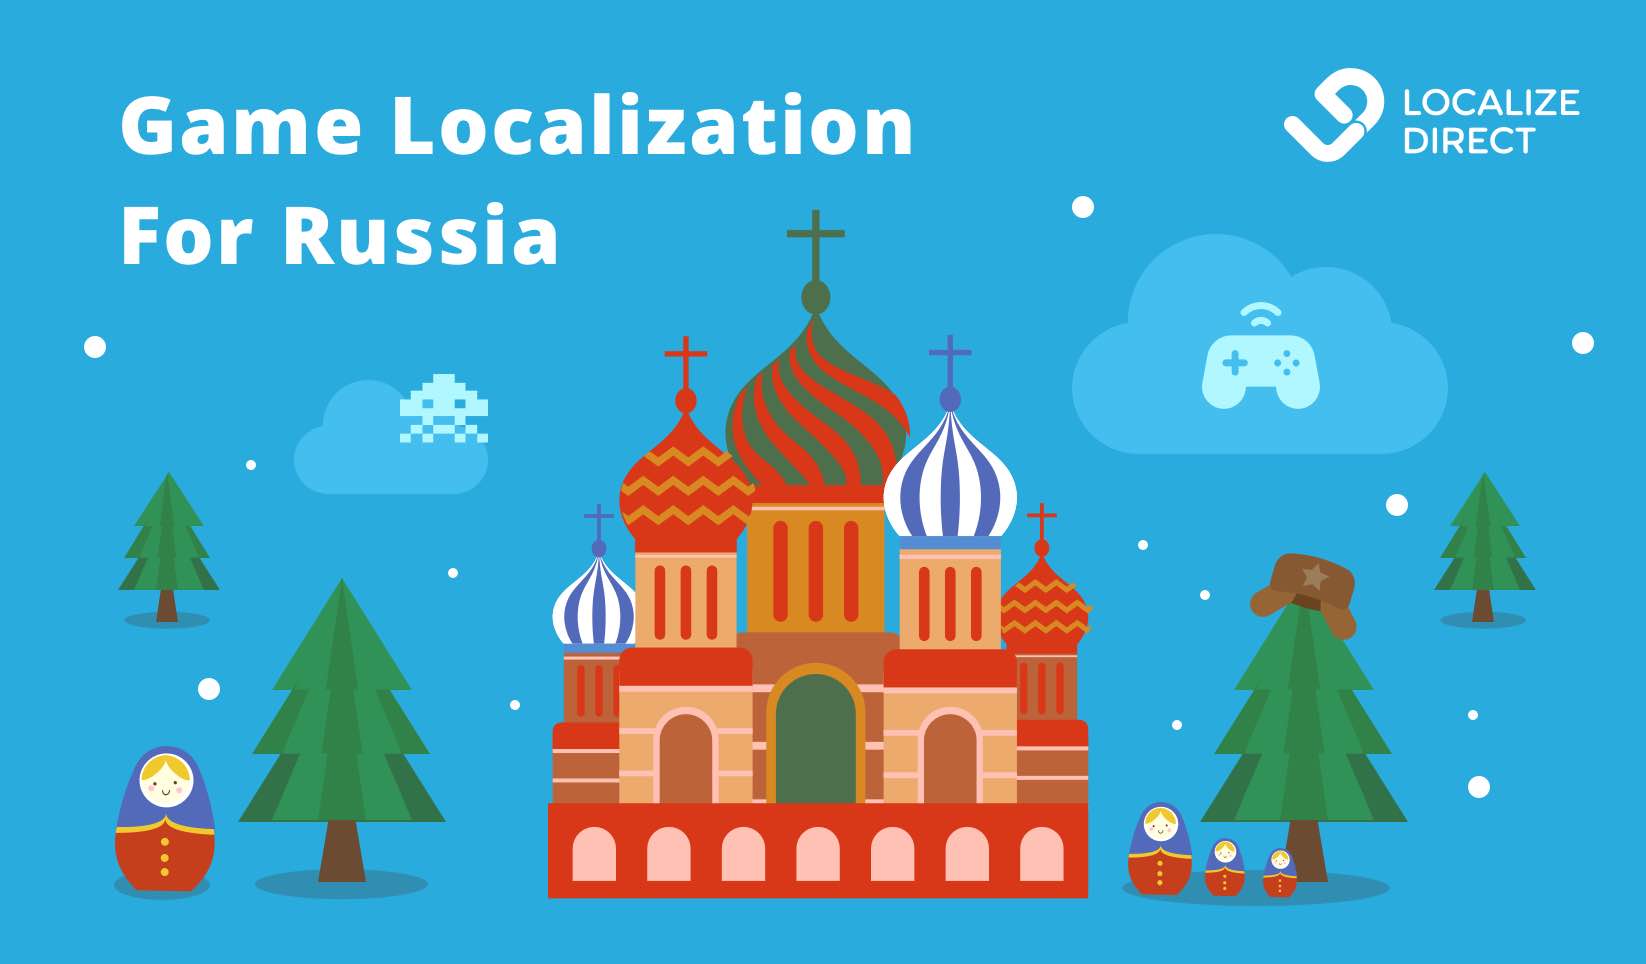 Game Localization For Russia Go Hard Or Go Home! LocalizeDirect image picture